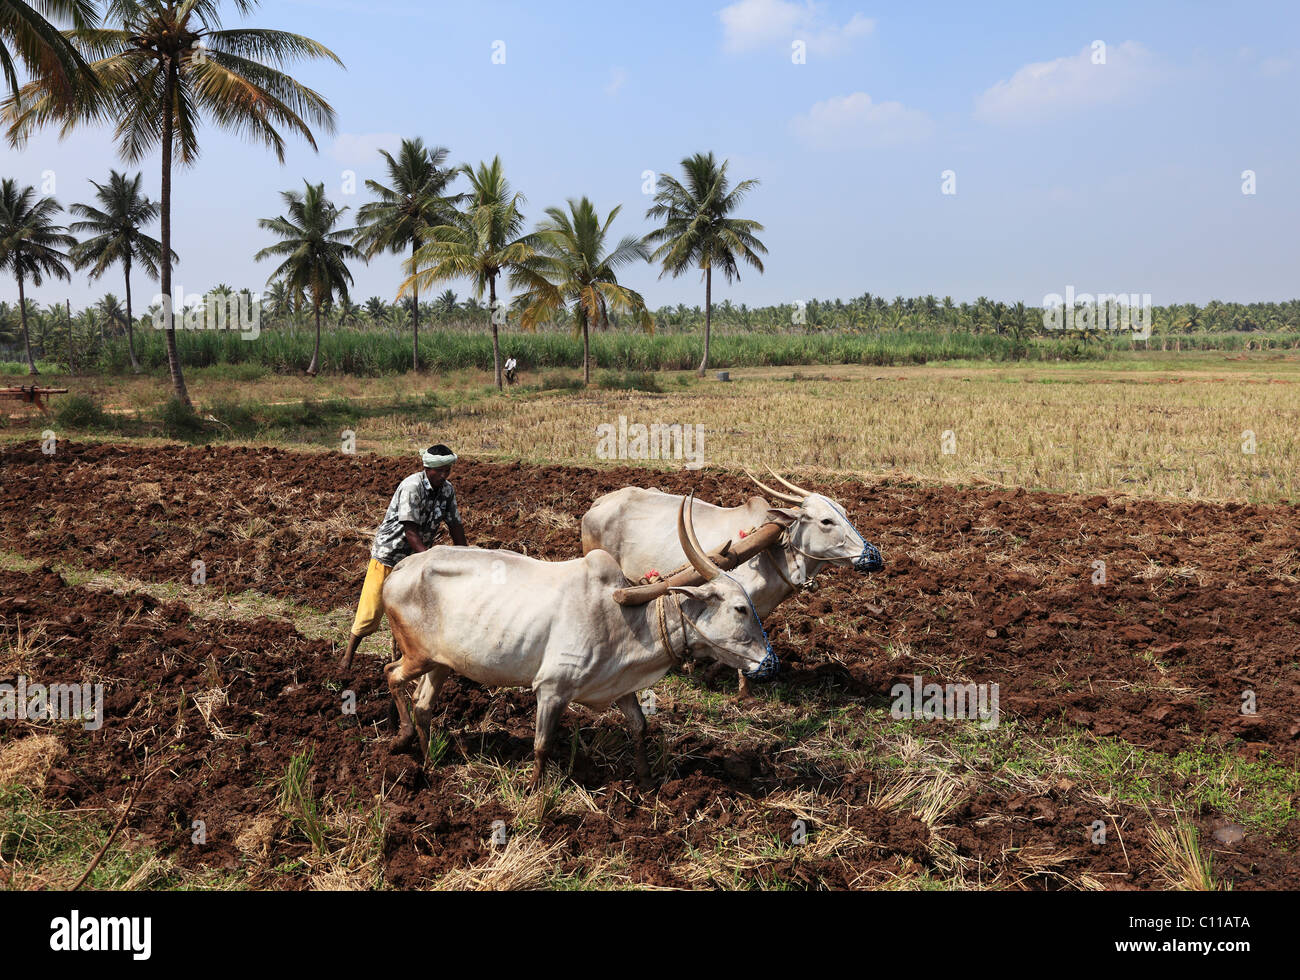 Farmer plowing field with oxen plow, Bannur, Karnataka, South India, India, South Asia, Asia Stock Photo